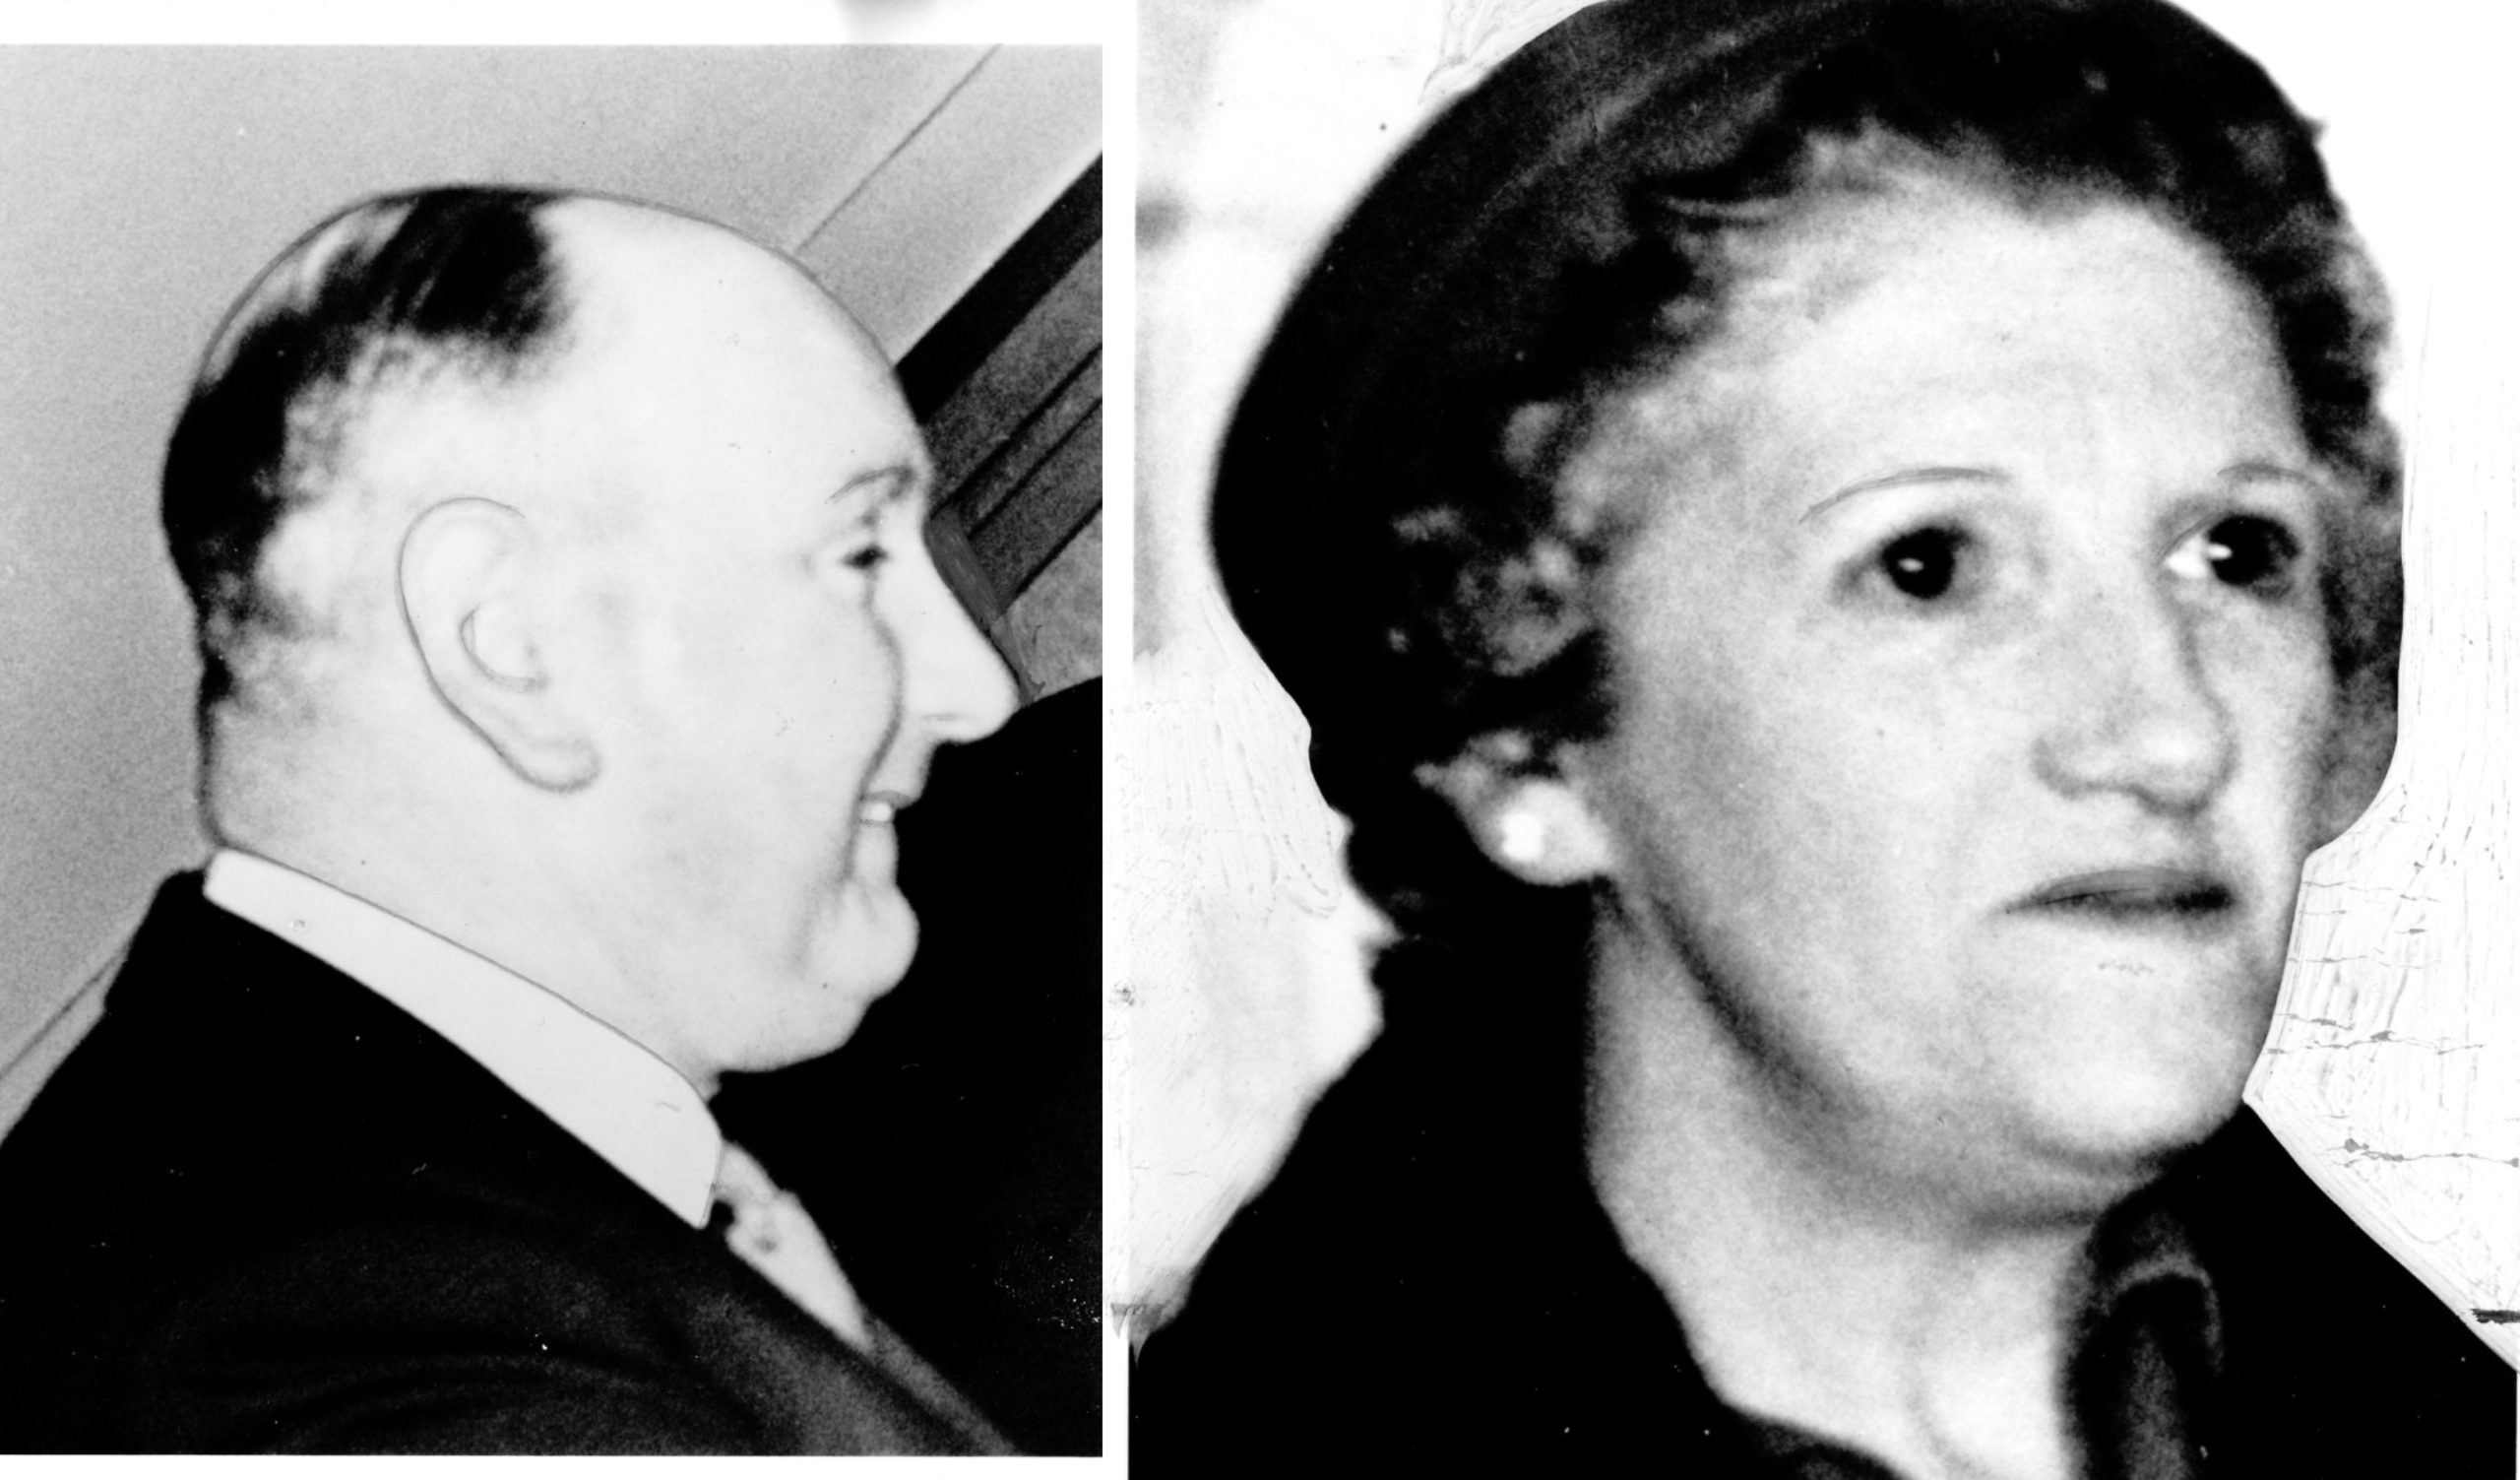 Dr Alexander Wood and his wife, Dorothy, who were murdered in their home in Roseangle, Dundee.